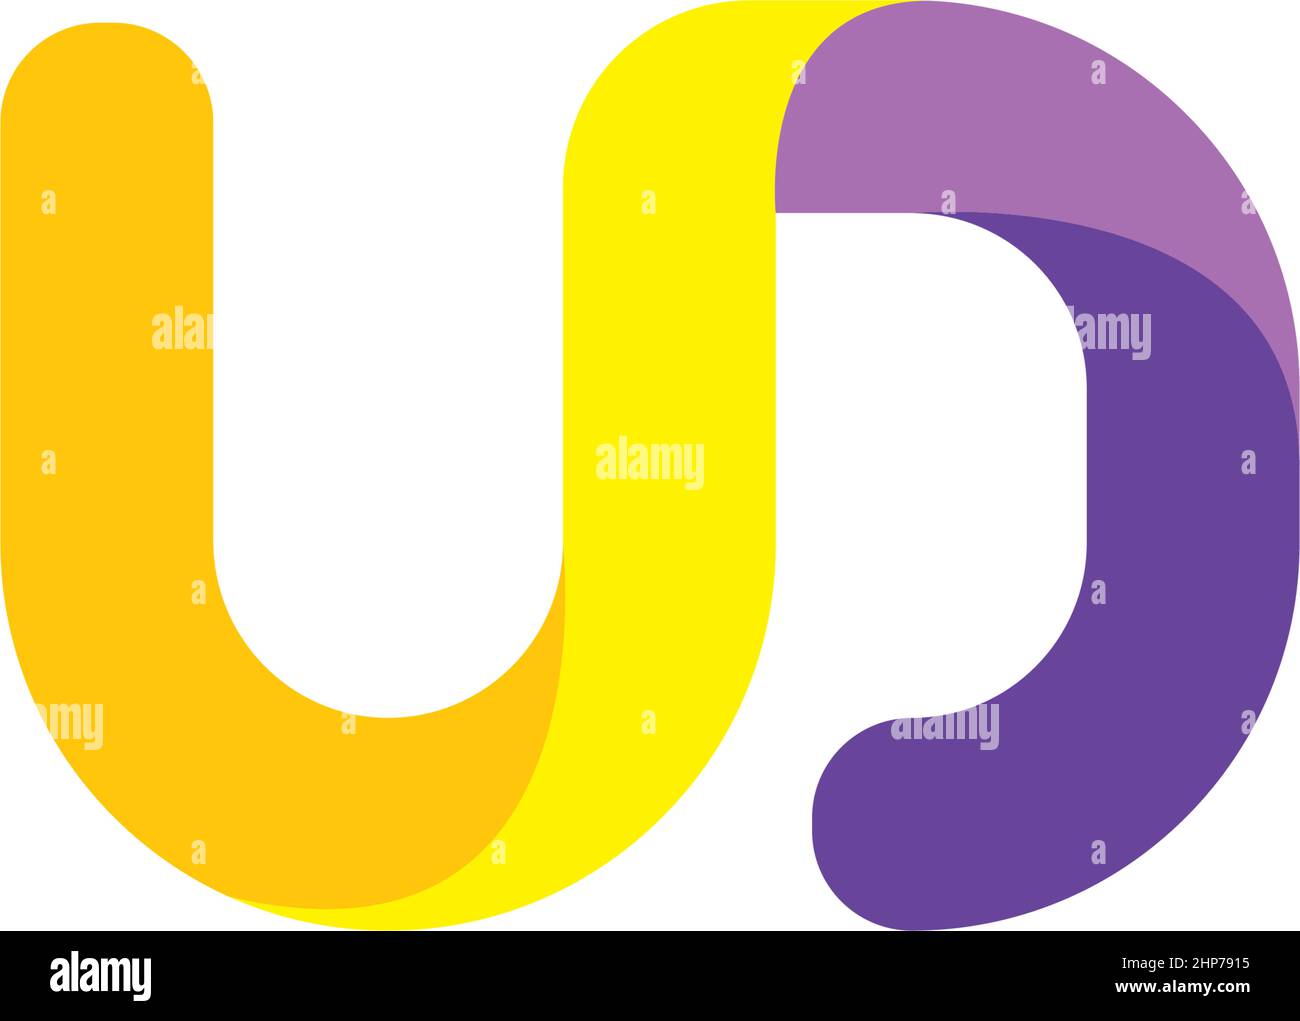 ud letter icon vector design illustration Stock Vector